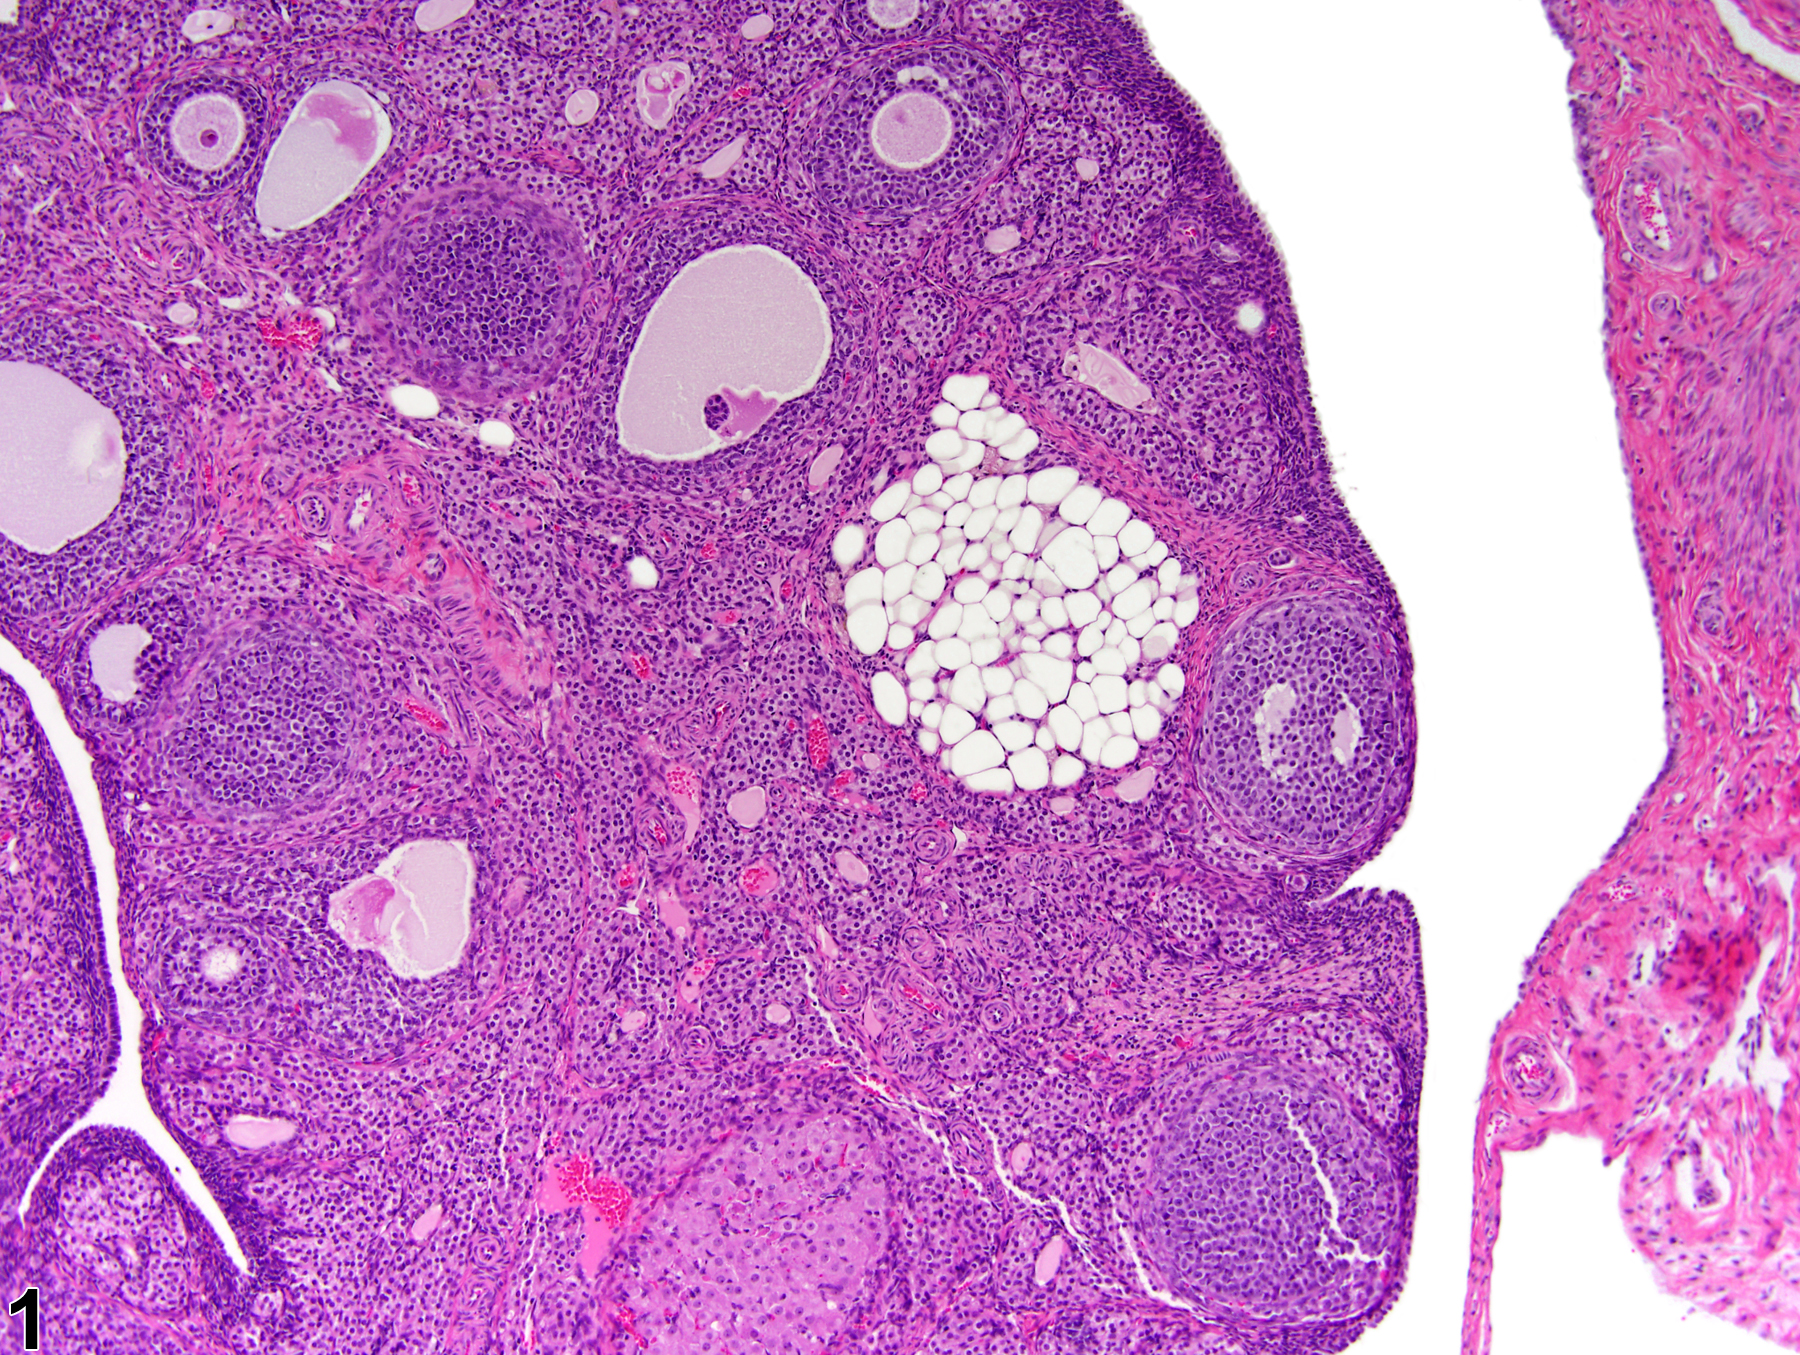 Image of fatty change in the ovary from a female F344/N rat in a subchronic study